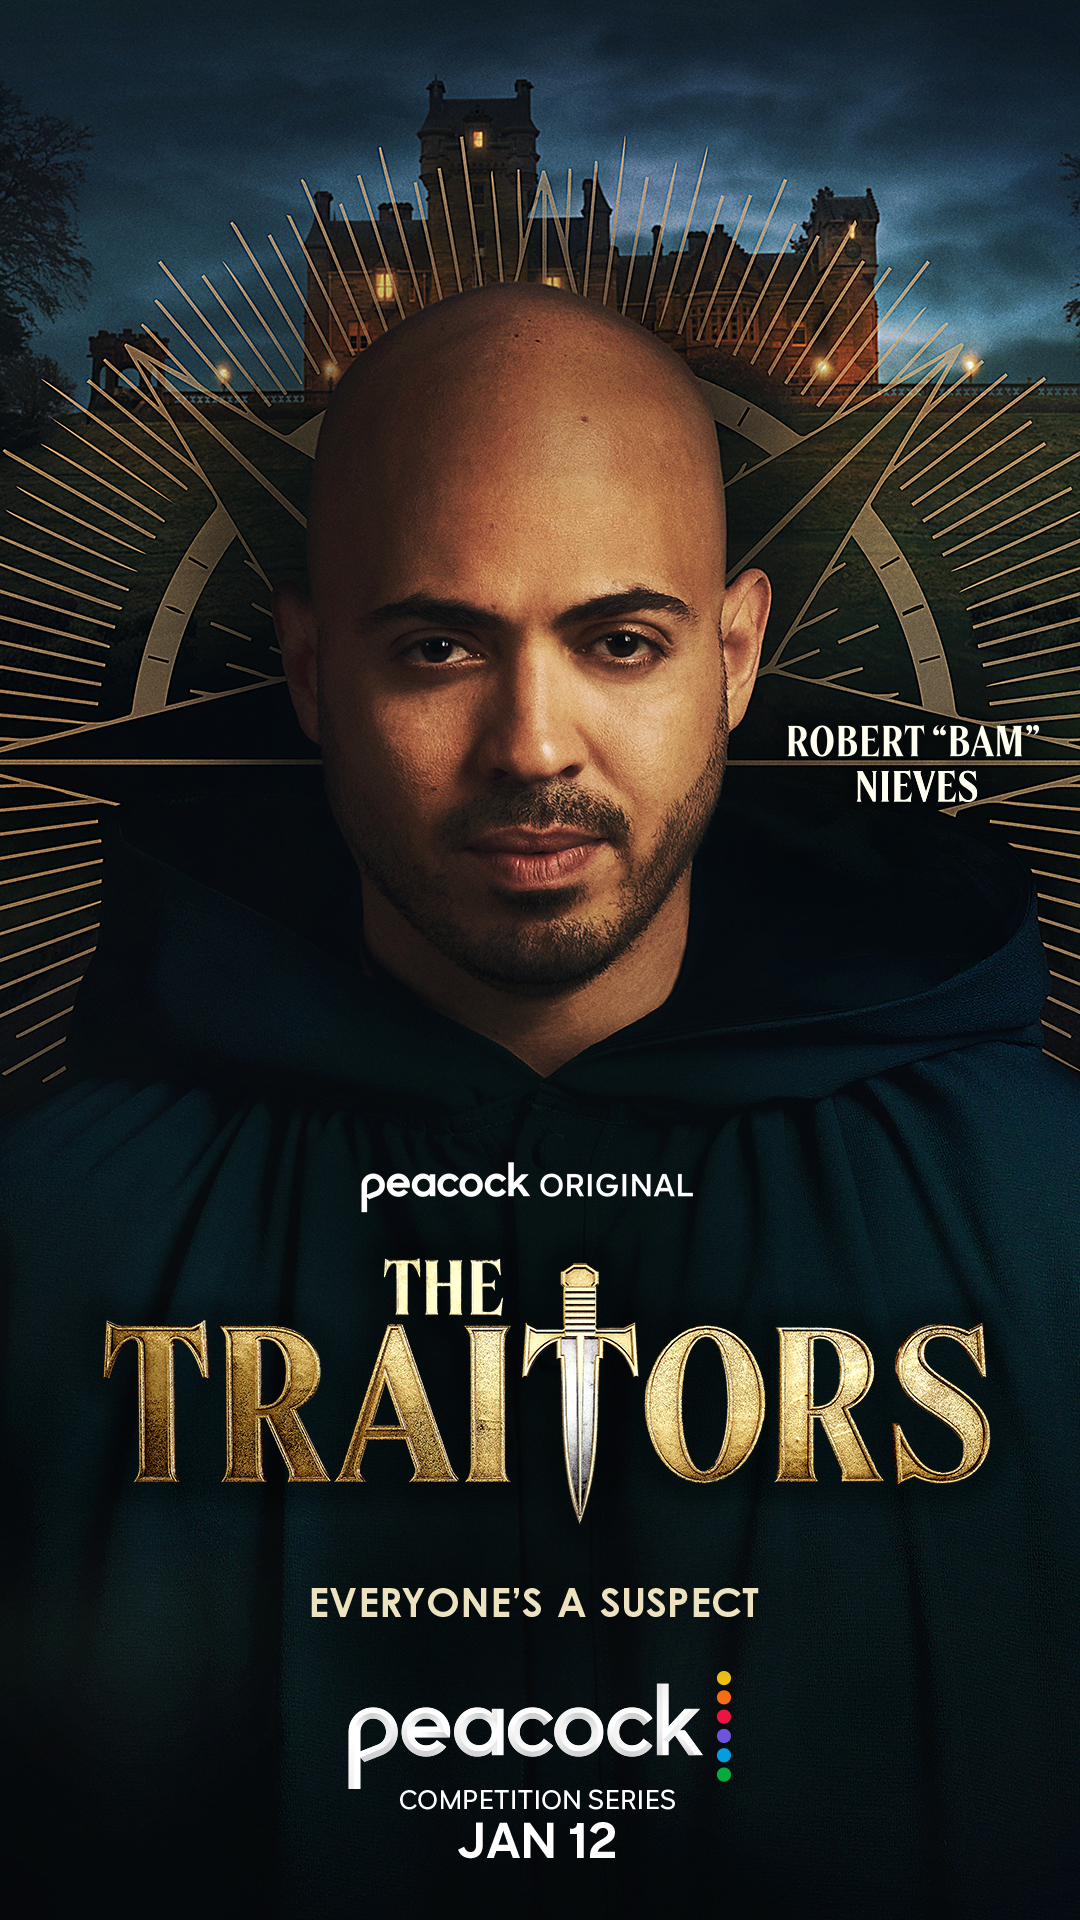 Robert “Bam” Nieves for 'The Traitors'